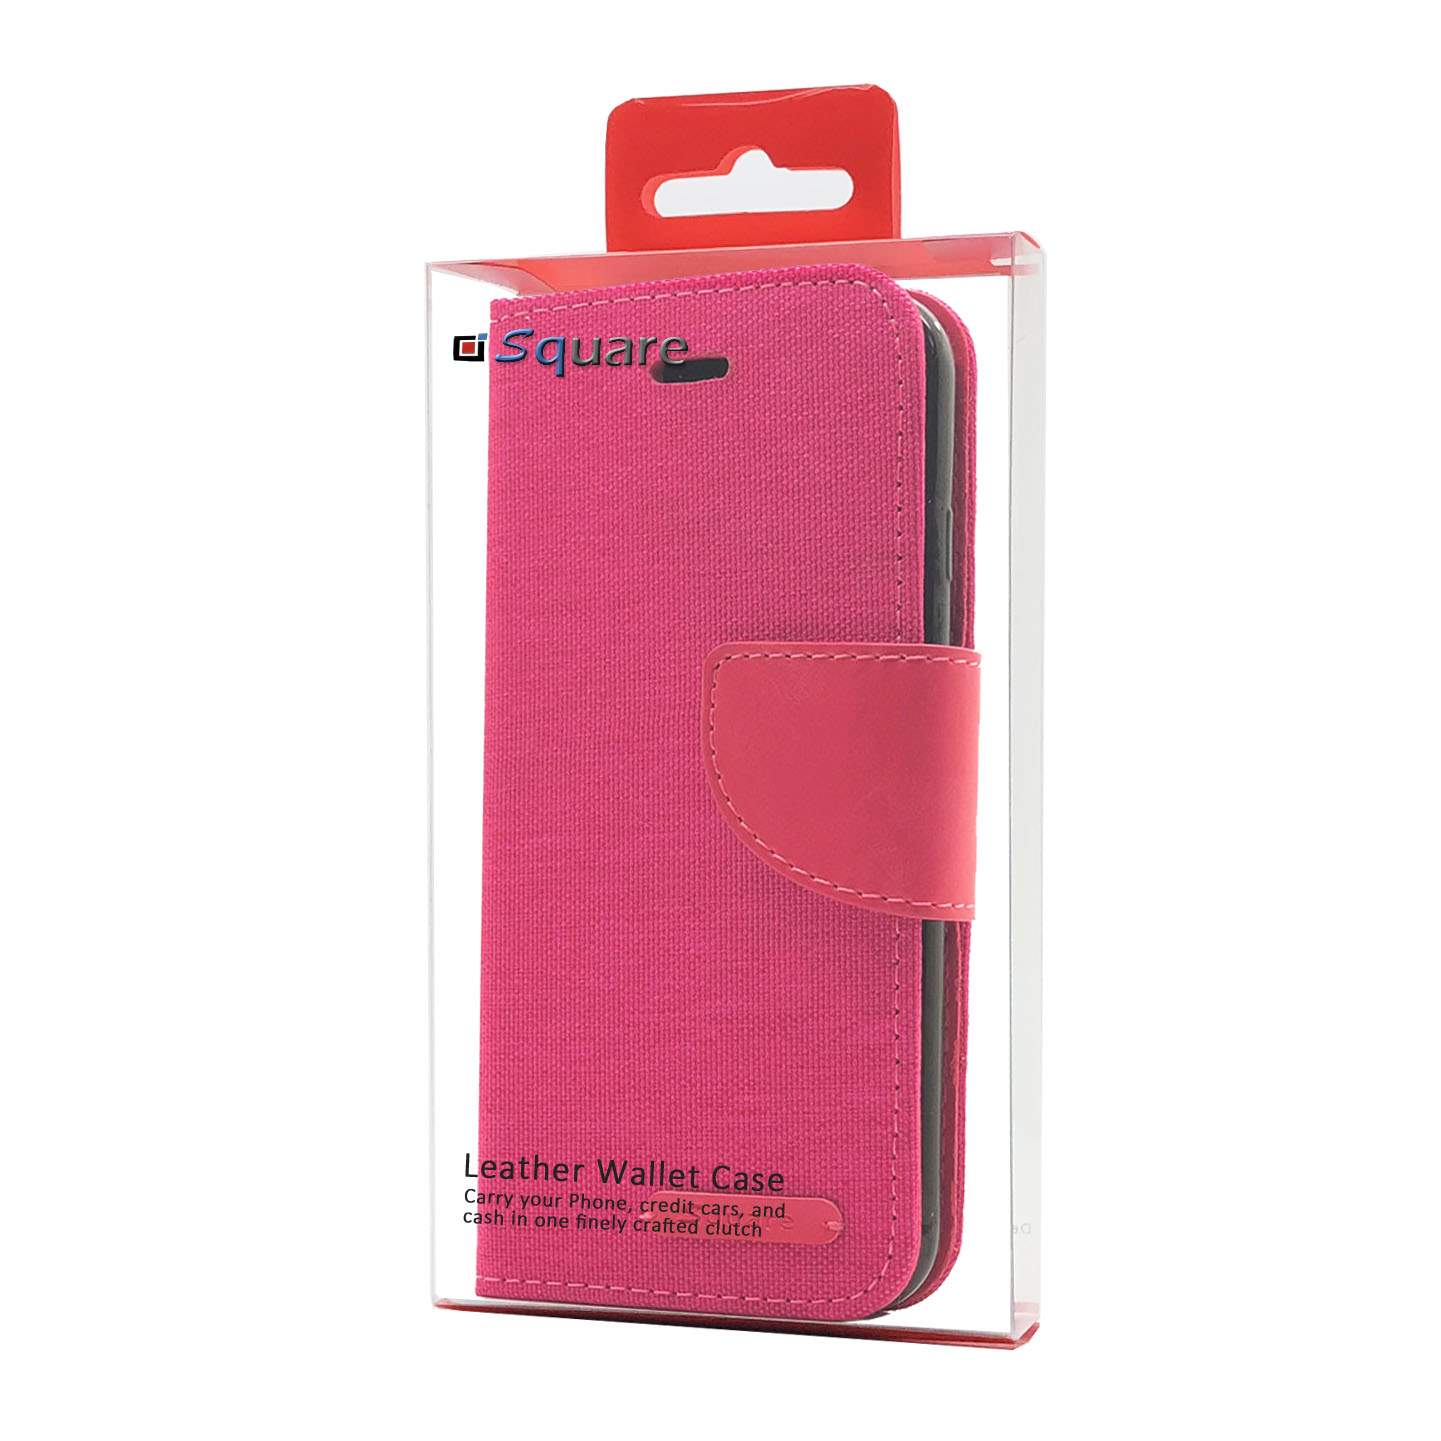 Mesh Wallet Case for Samsung Galaxy Note 10 (hotpink)